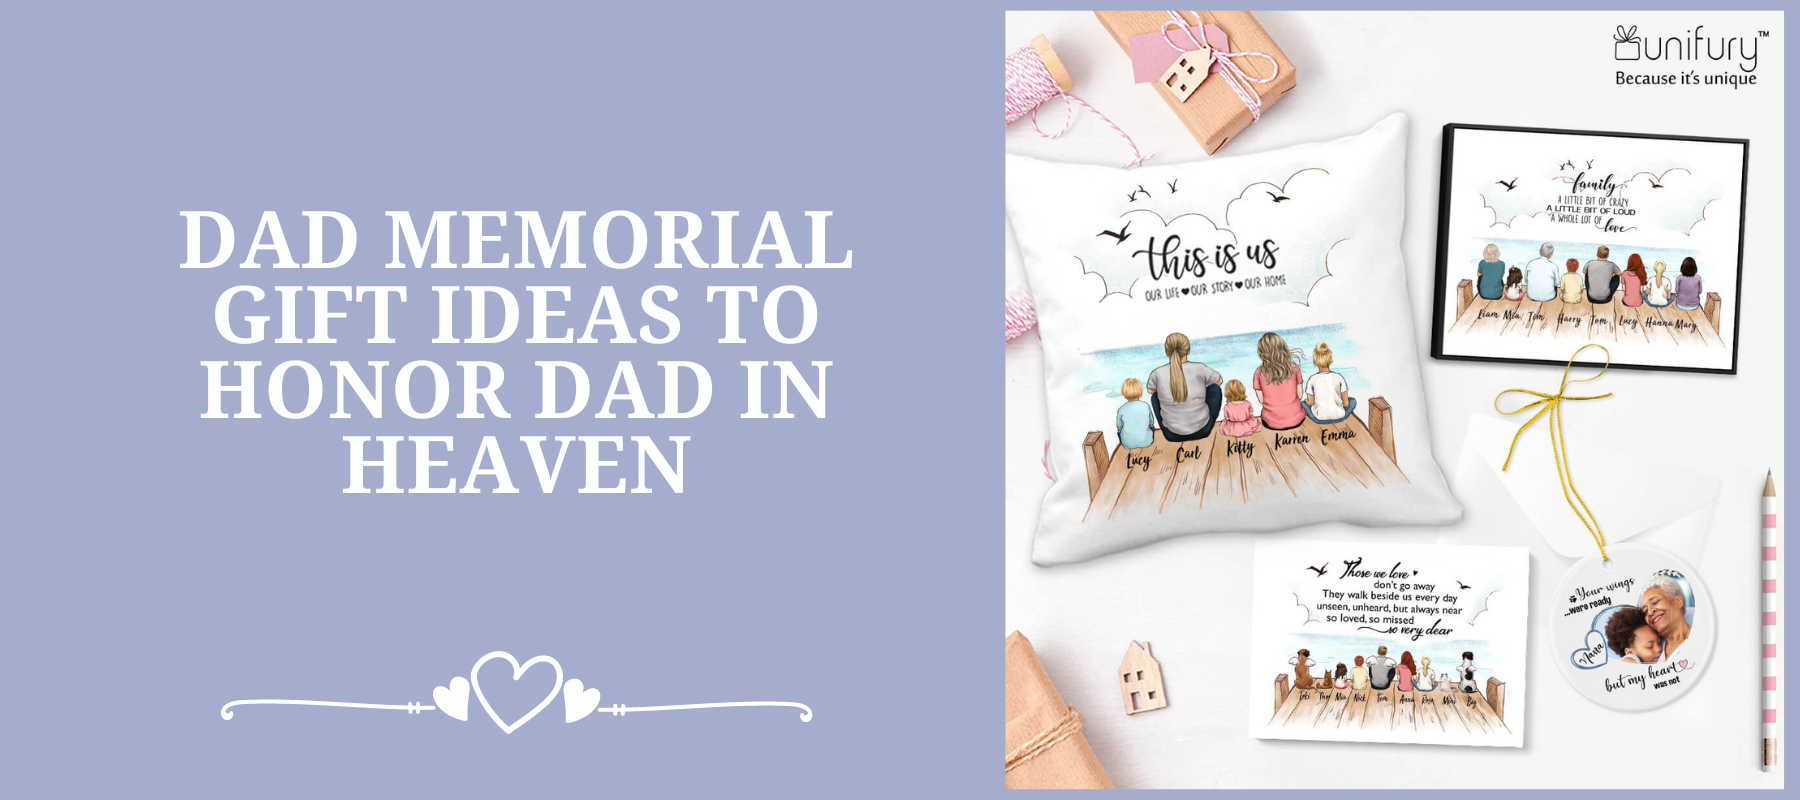 Dad Memorial Gift Ideas: In Memory of Dad Gifts To Honor Dad | Unifury